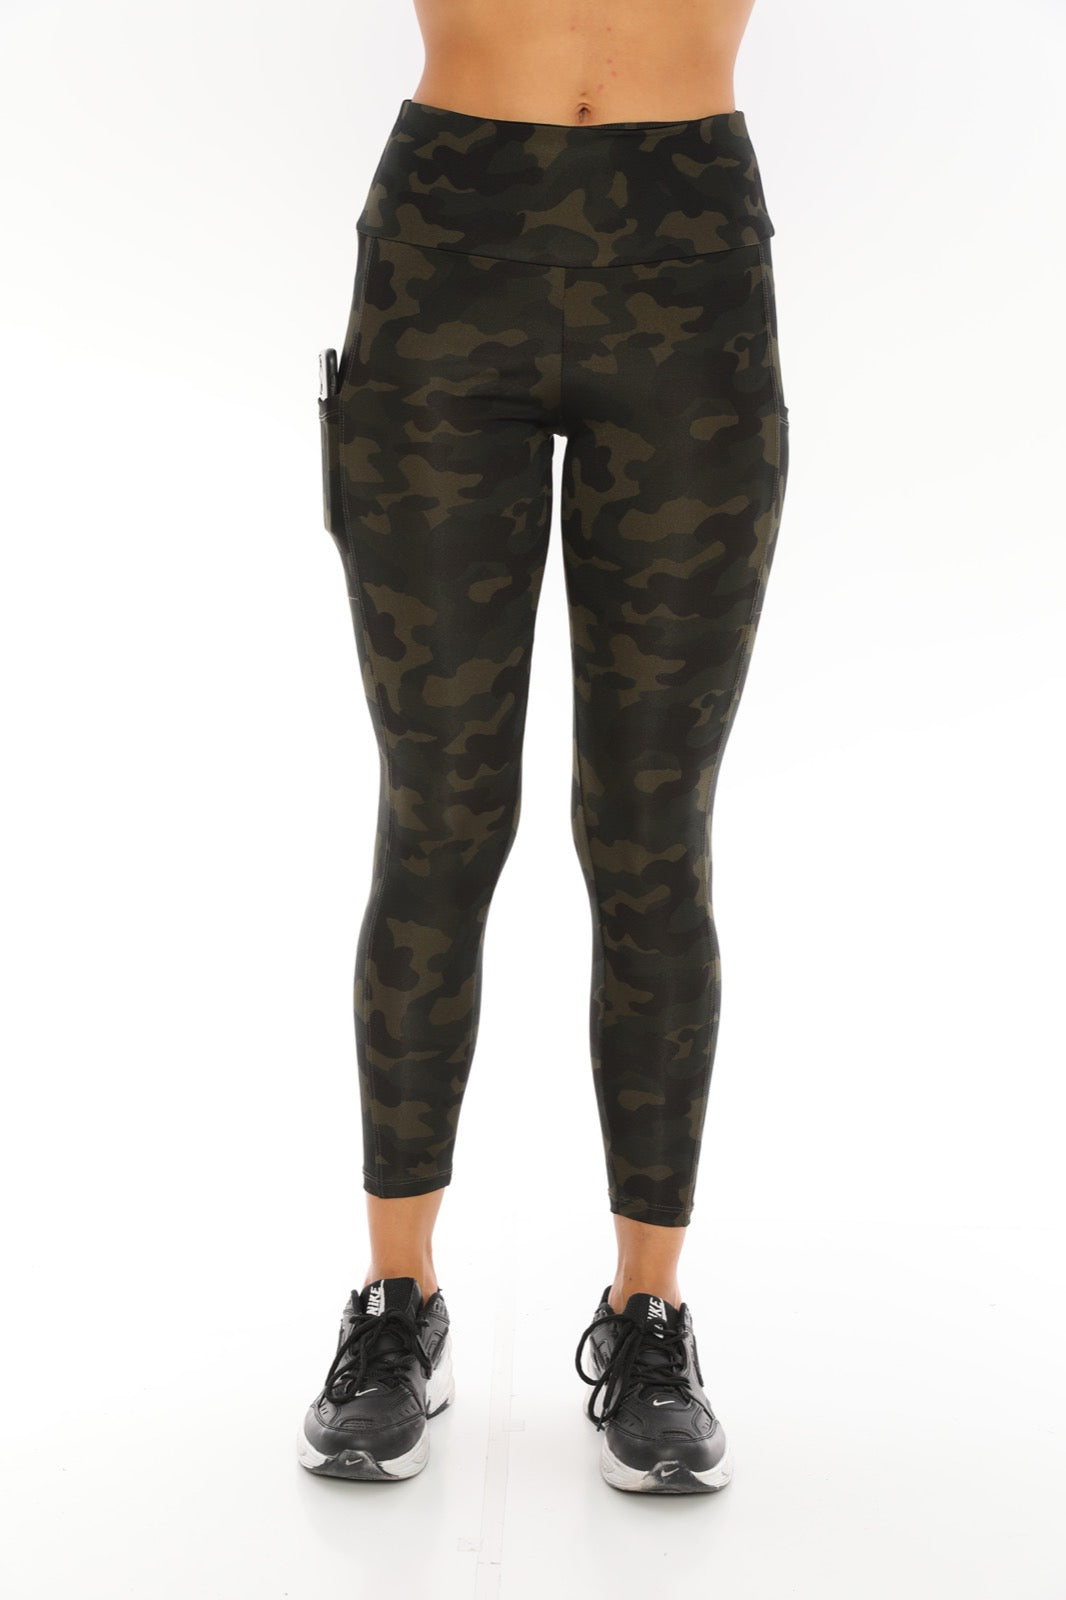 Leggings Low Waist with Pockets Green